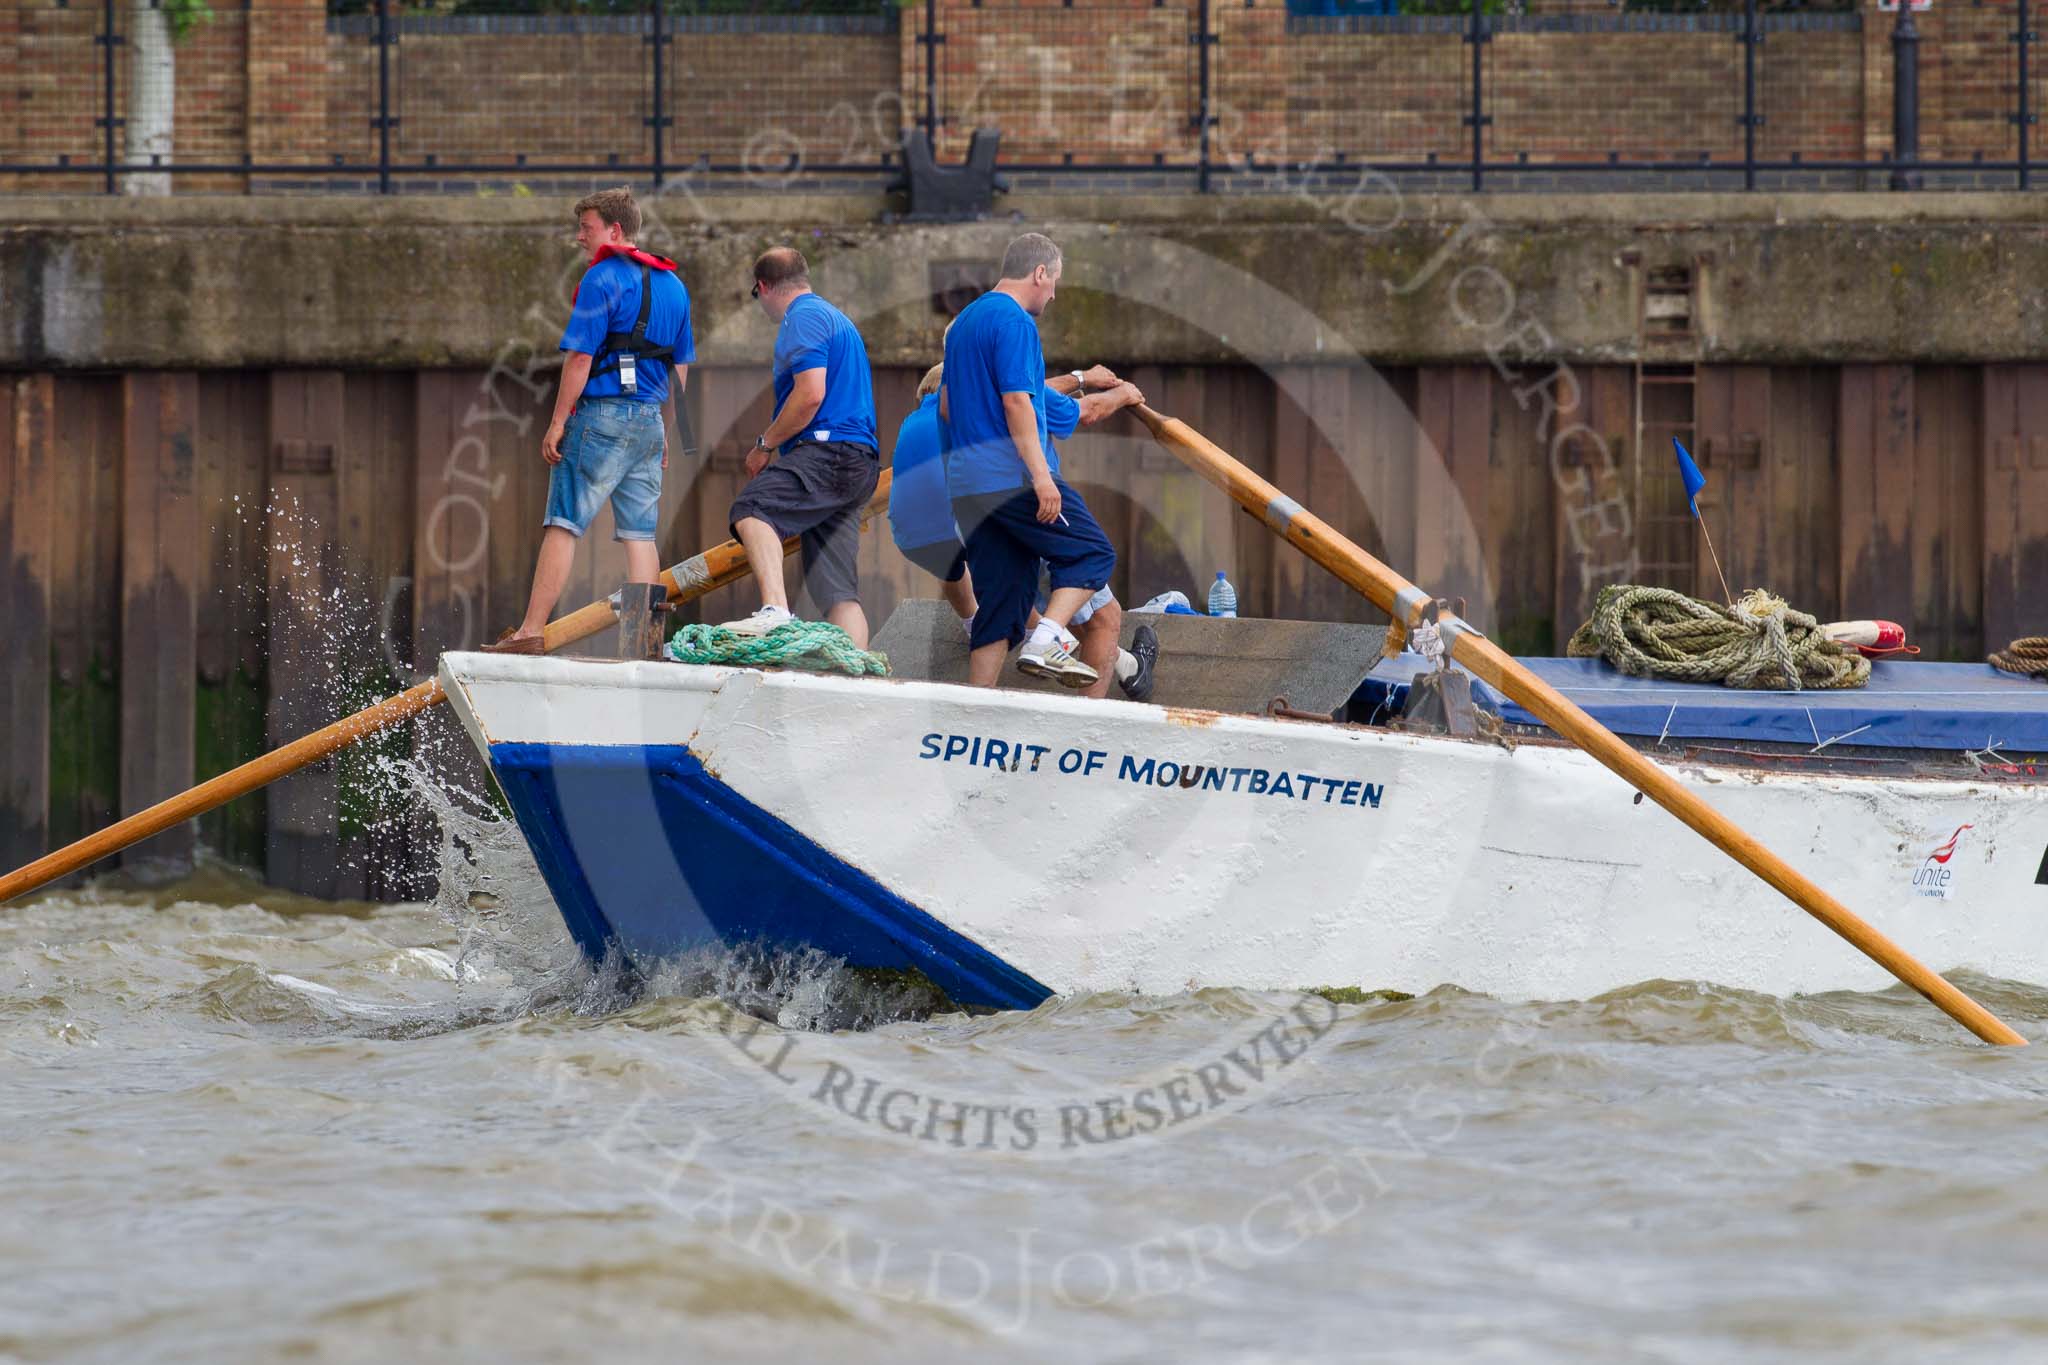 TOW River Thames Barge Driving Race 2014.
River Thames between Greenwich and Westminster,
London,

United Kingdom,
on 28 June 2014 at 13:03, image #183